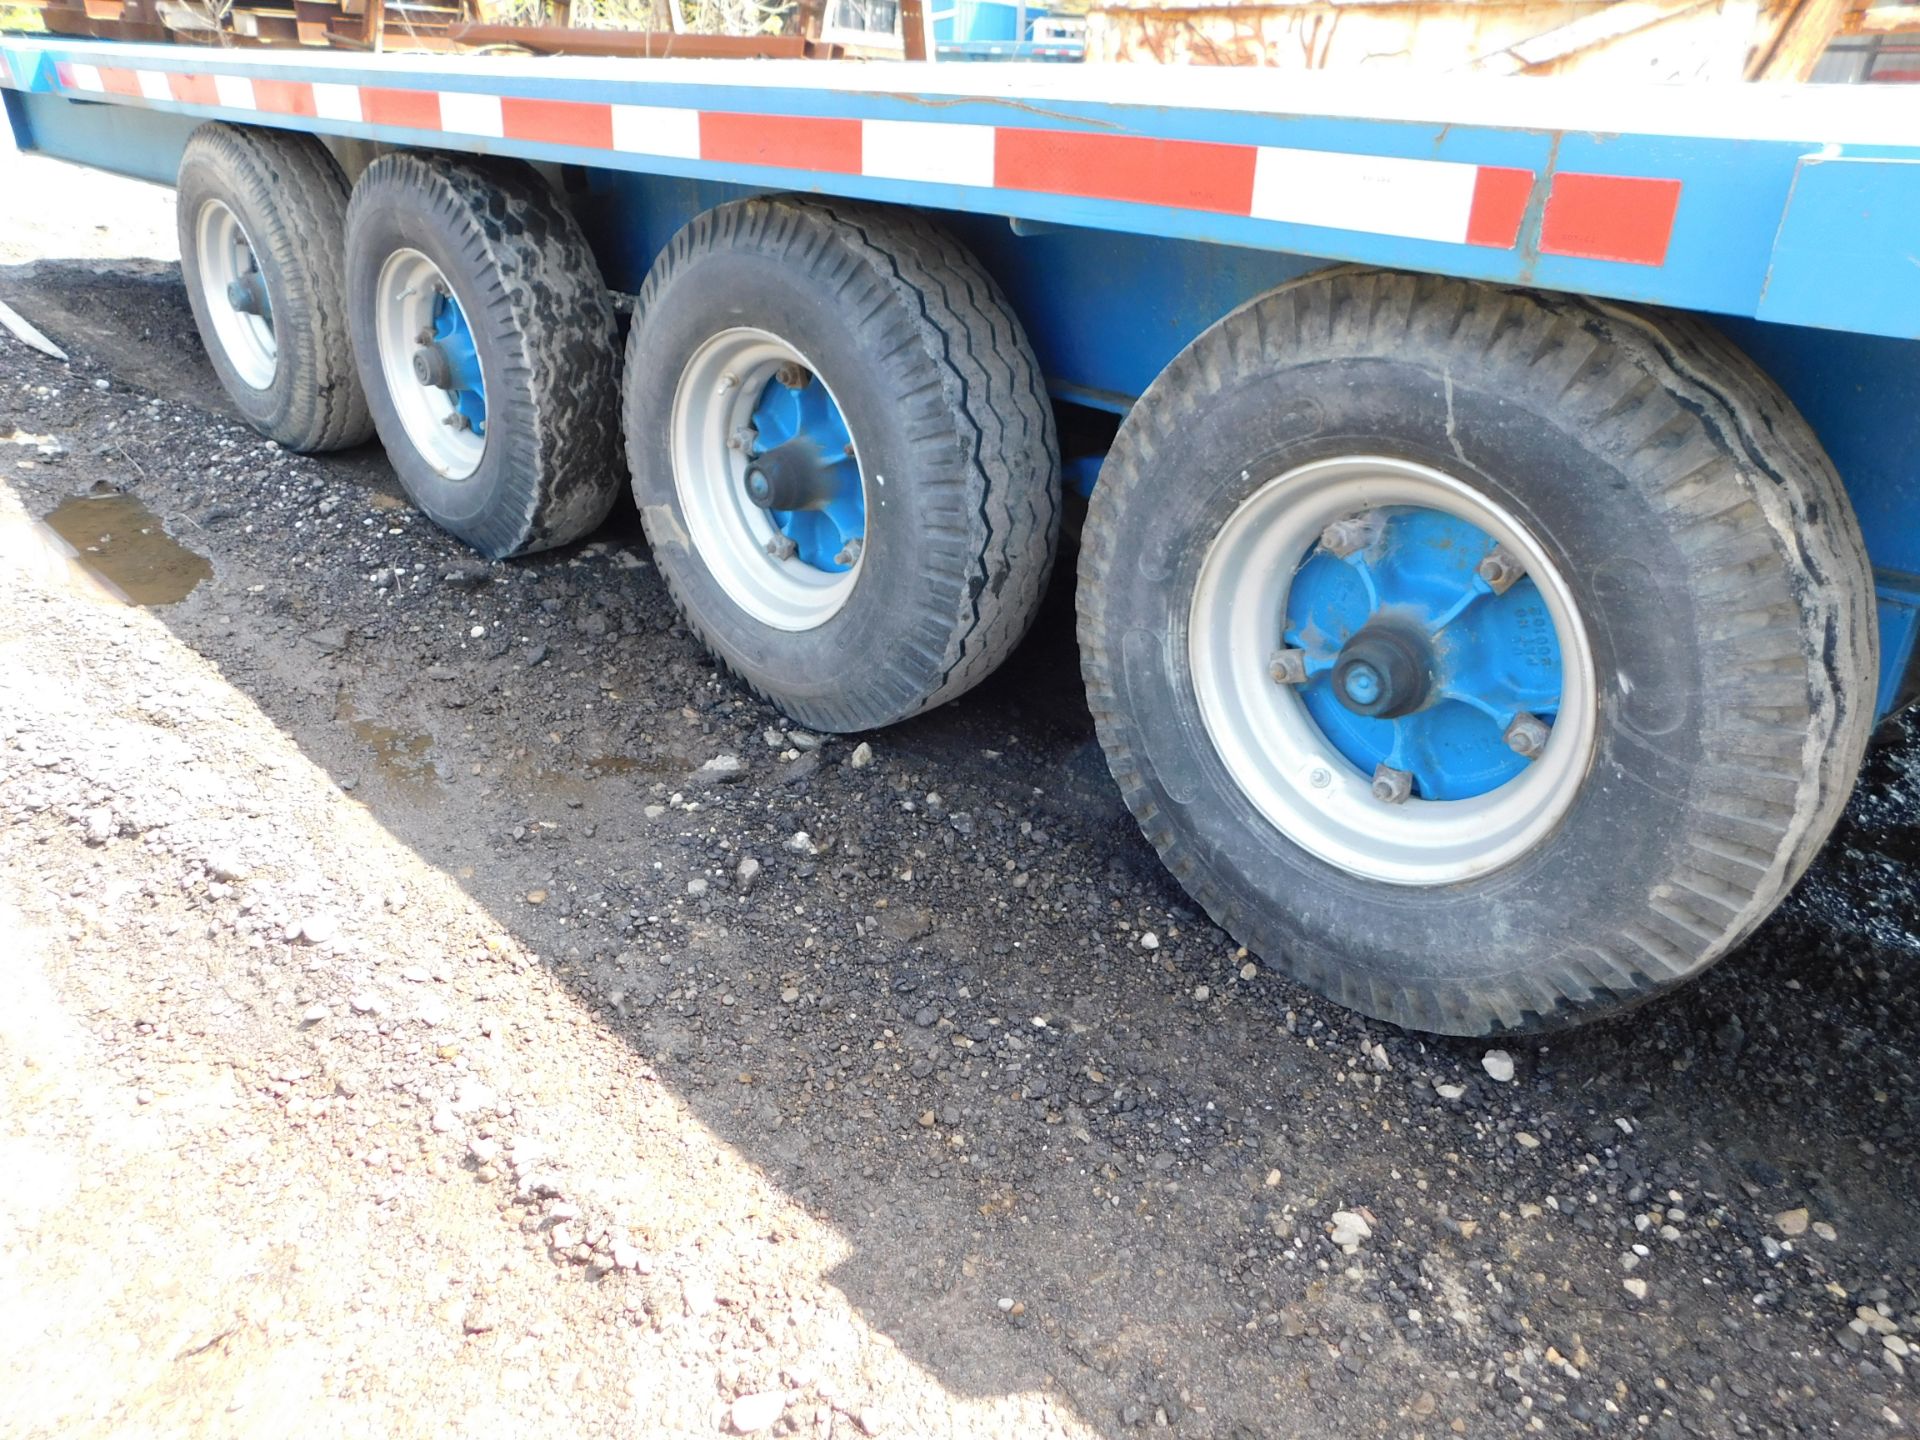 8' x 40' Flat Bed Tongue Pull Trailer, Wood Deck, Quad-Axle, 8-Wheels, Pintle Hitch - Image 3 of 11